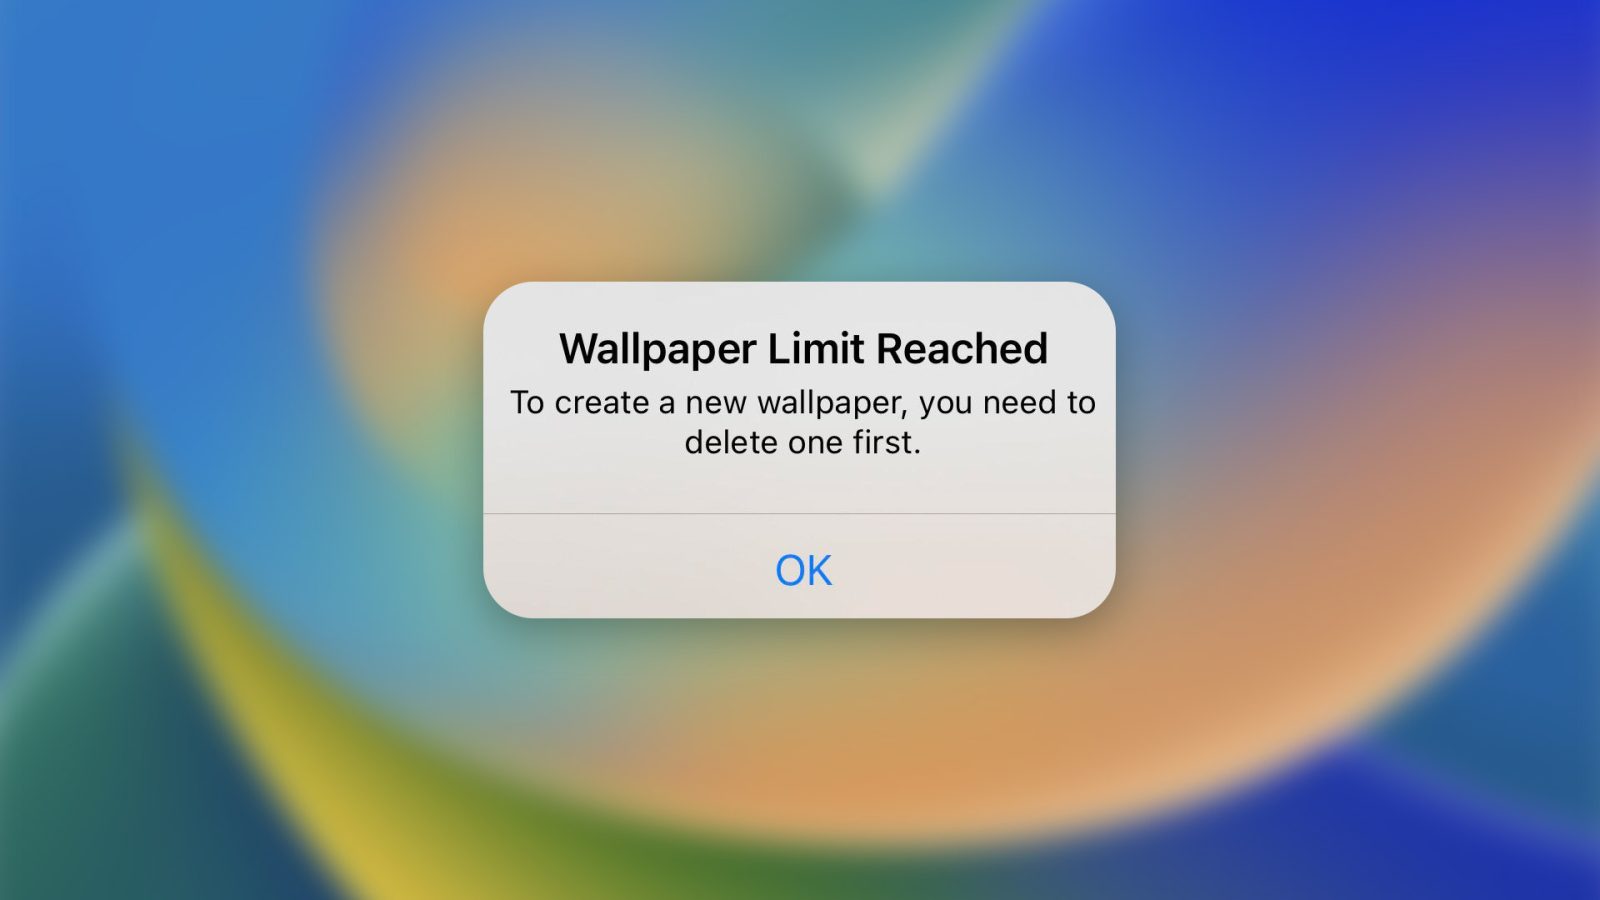 PSA: iOS 16 has a limit to how many custom lock screens users can create